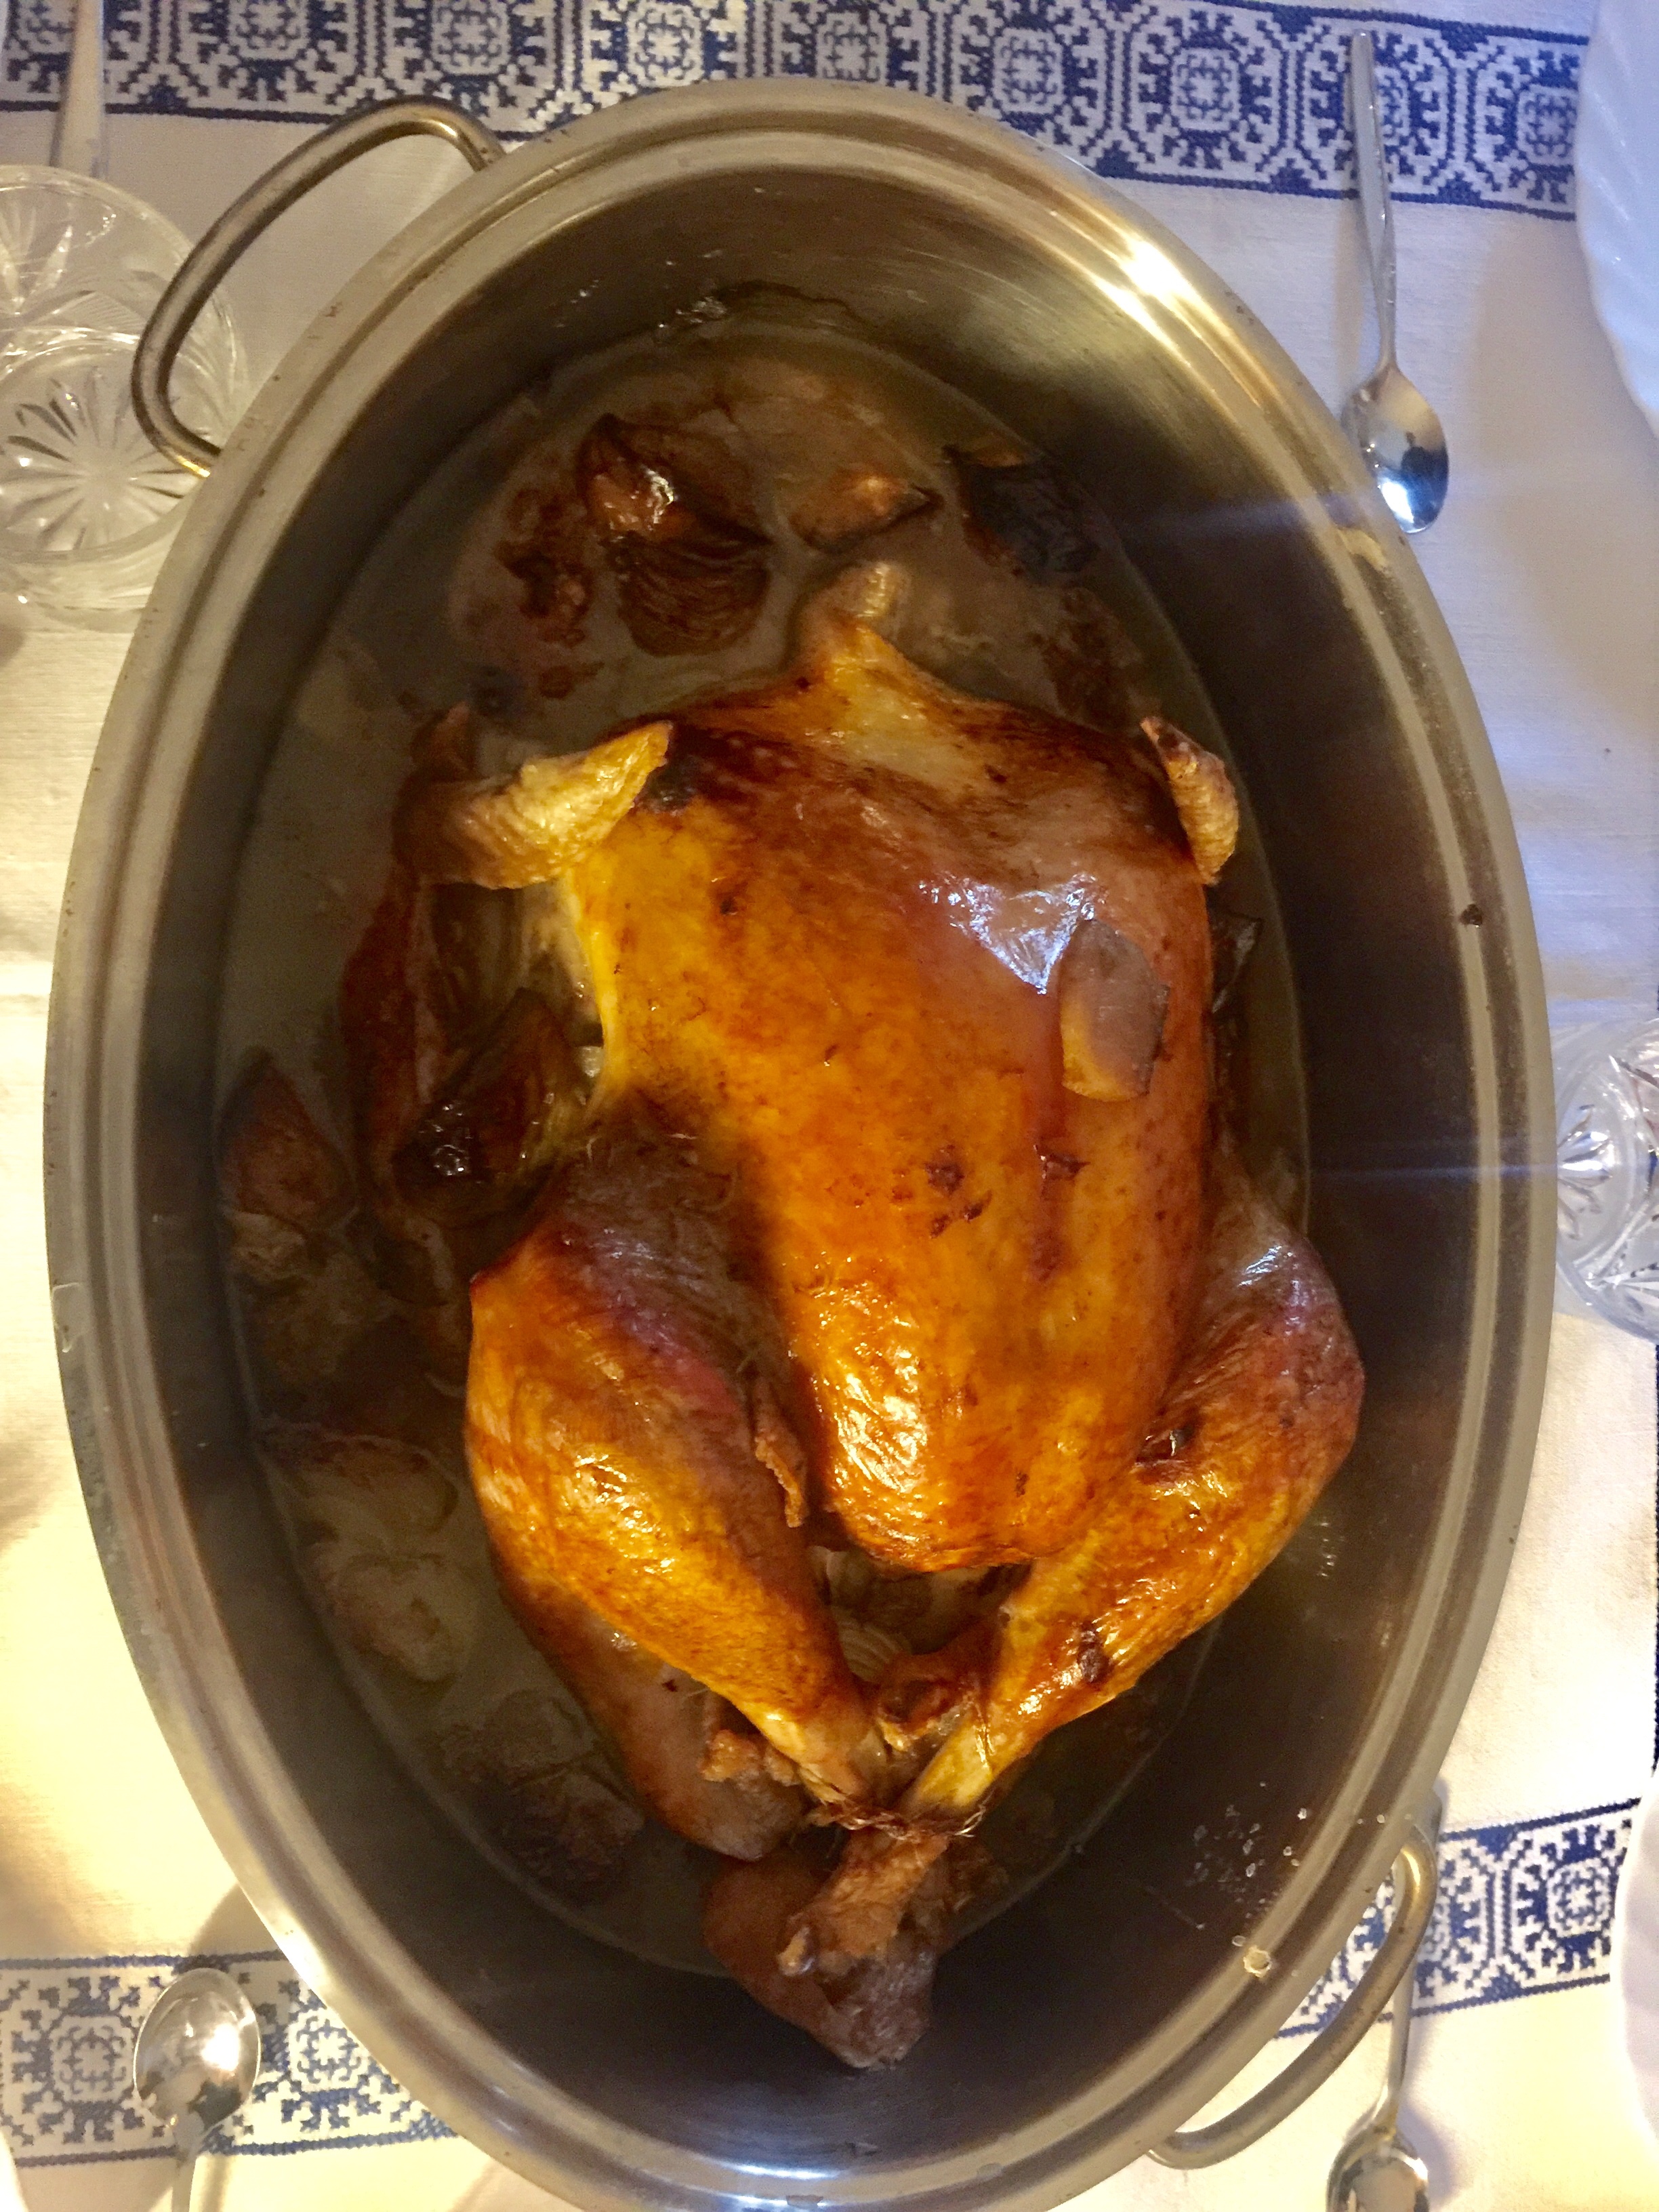 
German tradition evaporate bakes the practice of turkey, how to do delicious